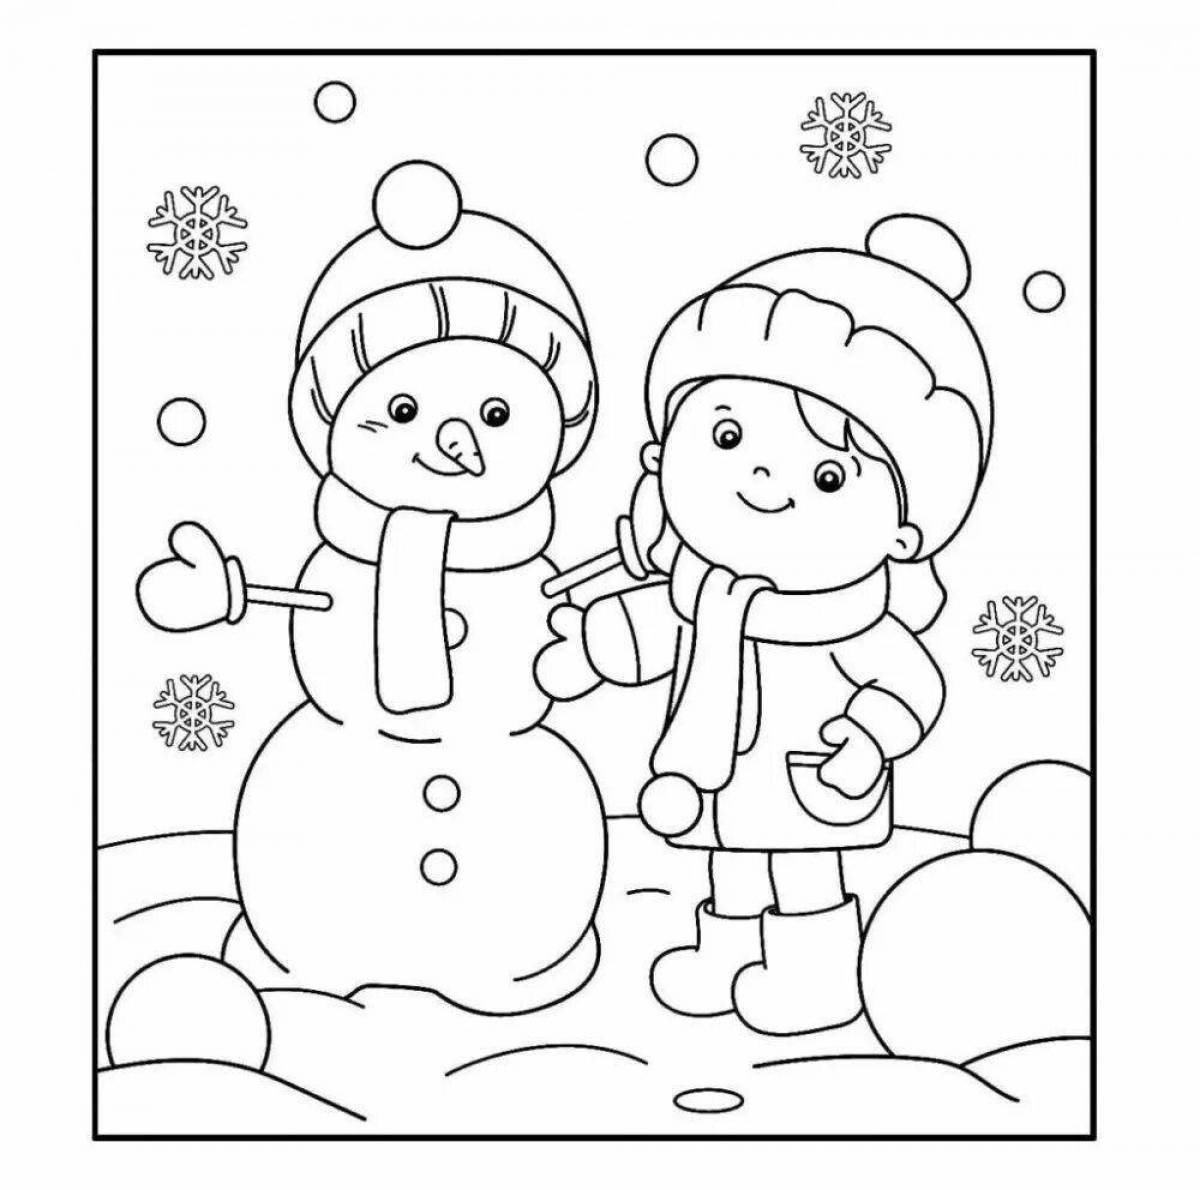 Coloring book funny snowman simulation